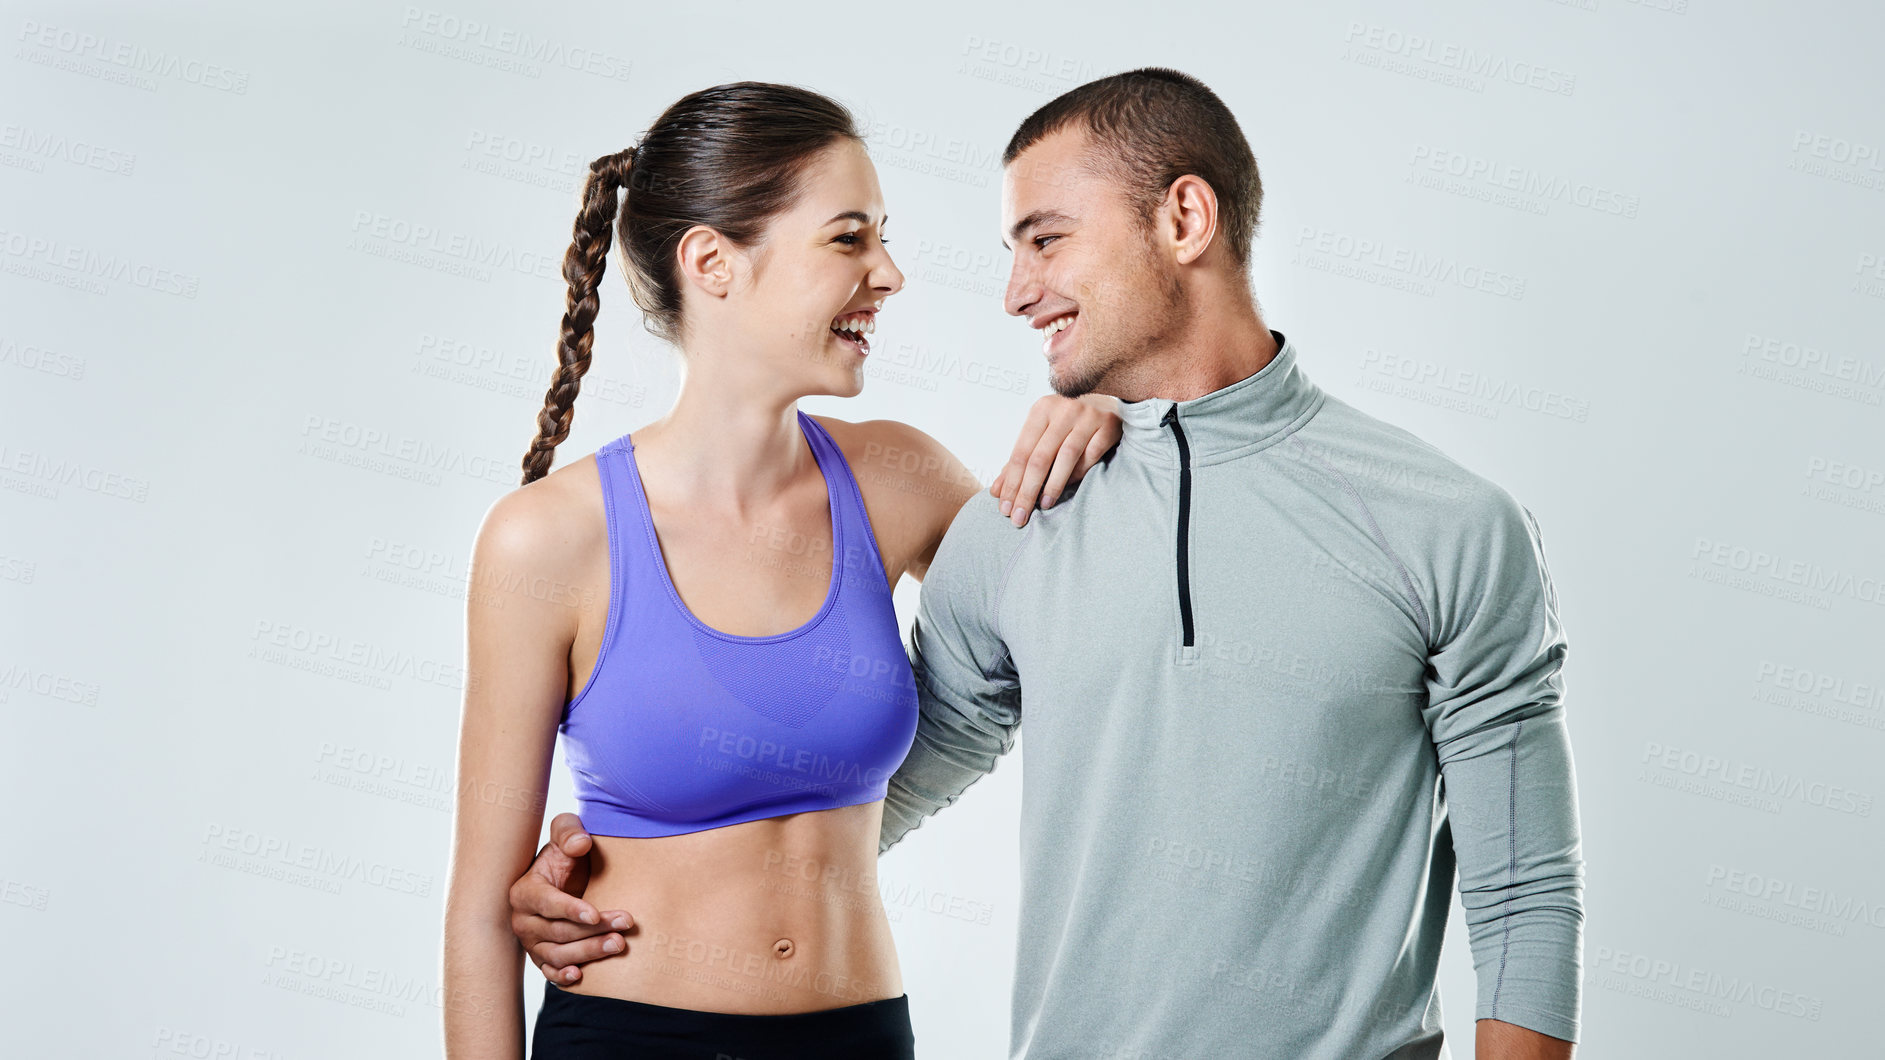 Buy stock photo Shot of a young couple standing in a studio wearing sports clothing
